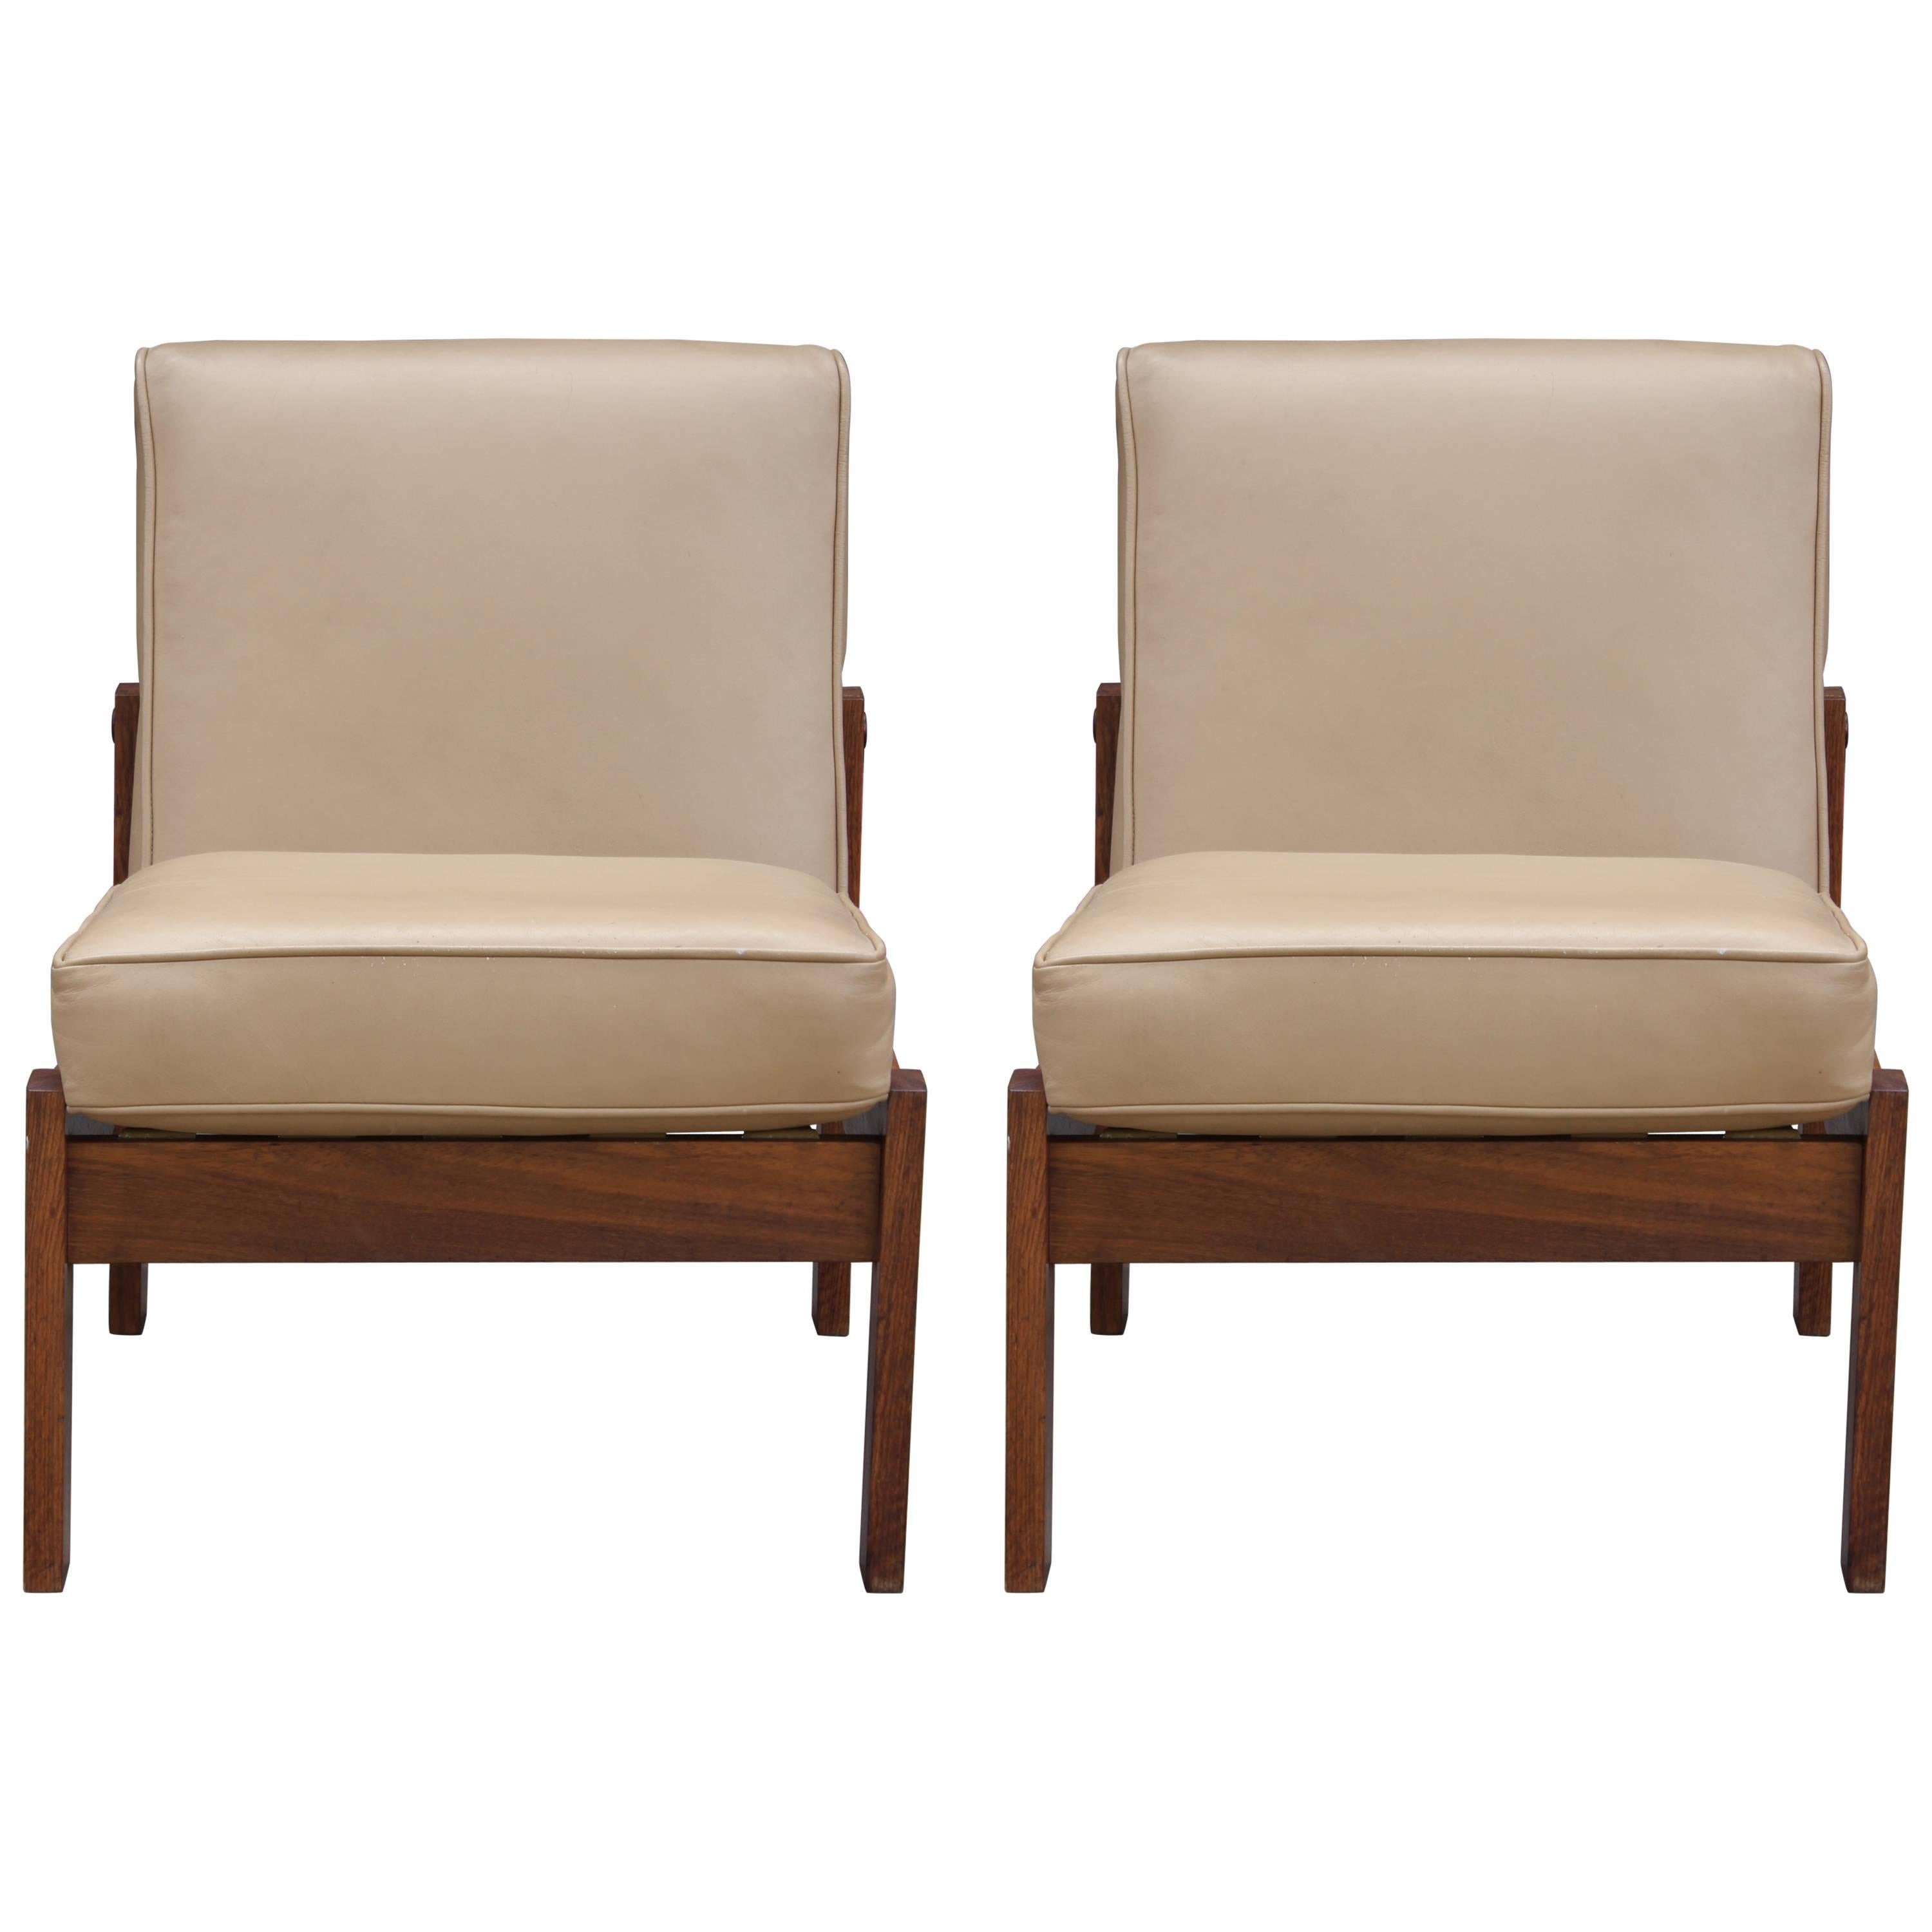 Modern Pair of Rosewood Slipper Chairs with Tan Leather